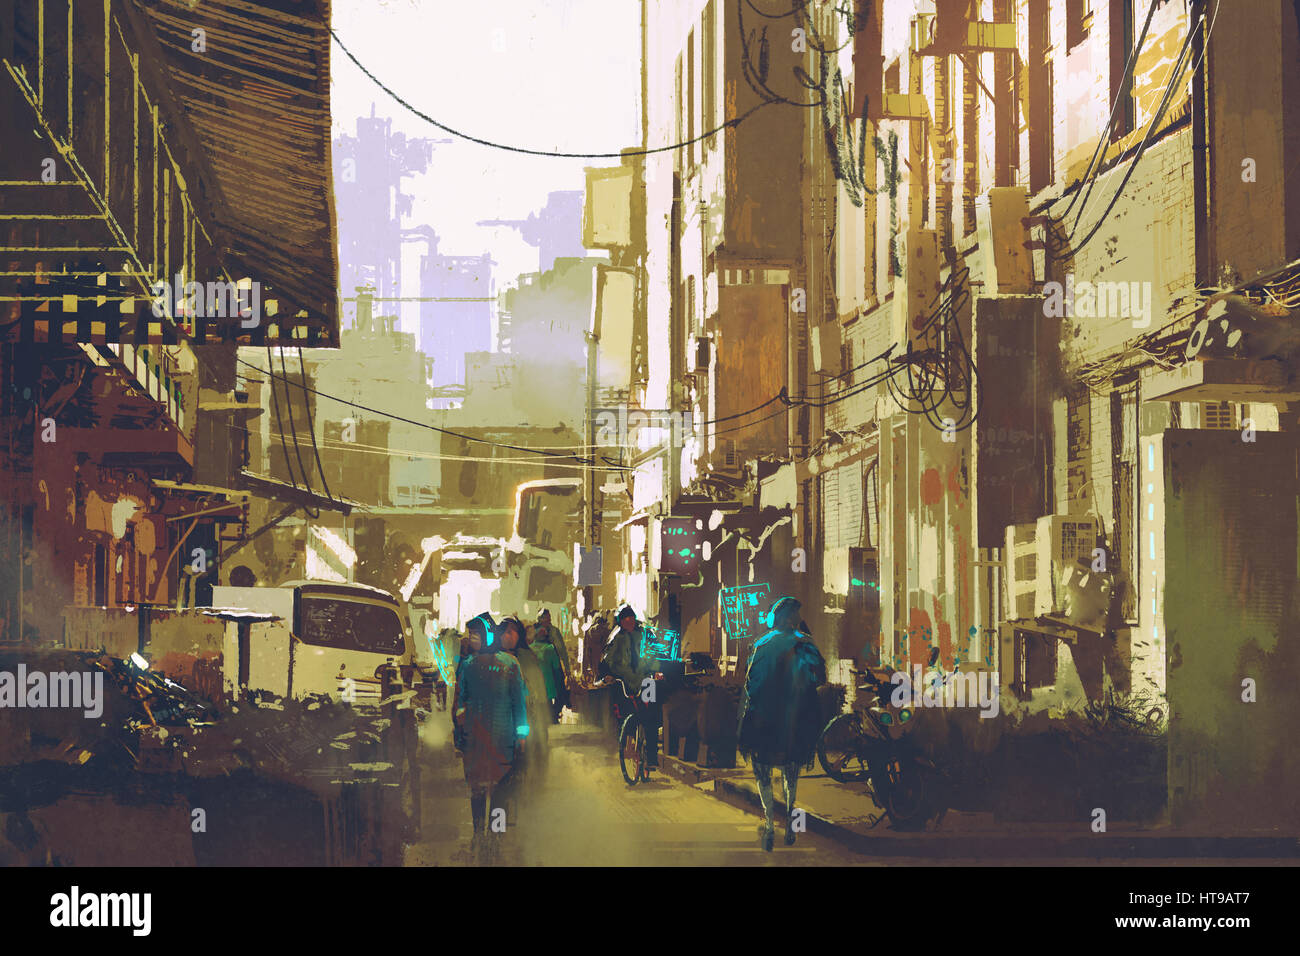 futuristic urban concept showing people walking in city street,illustration painting Stock Photo